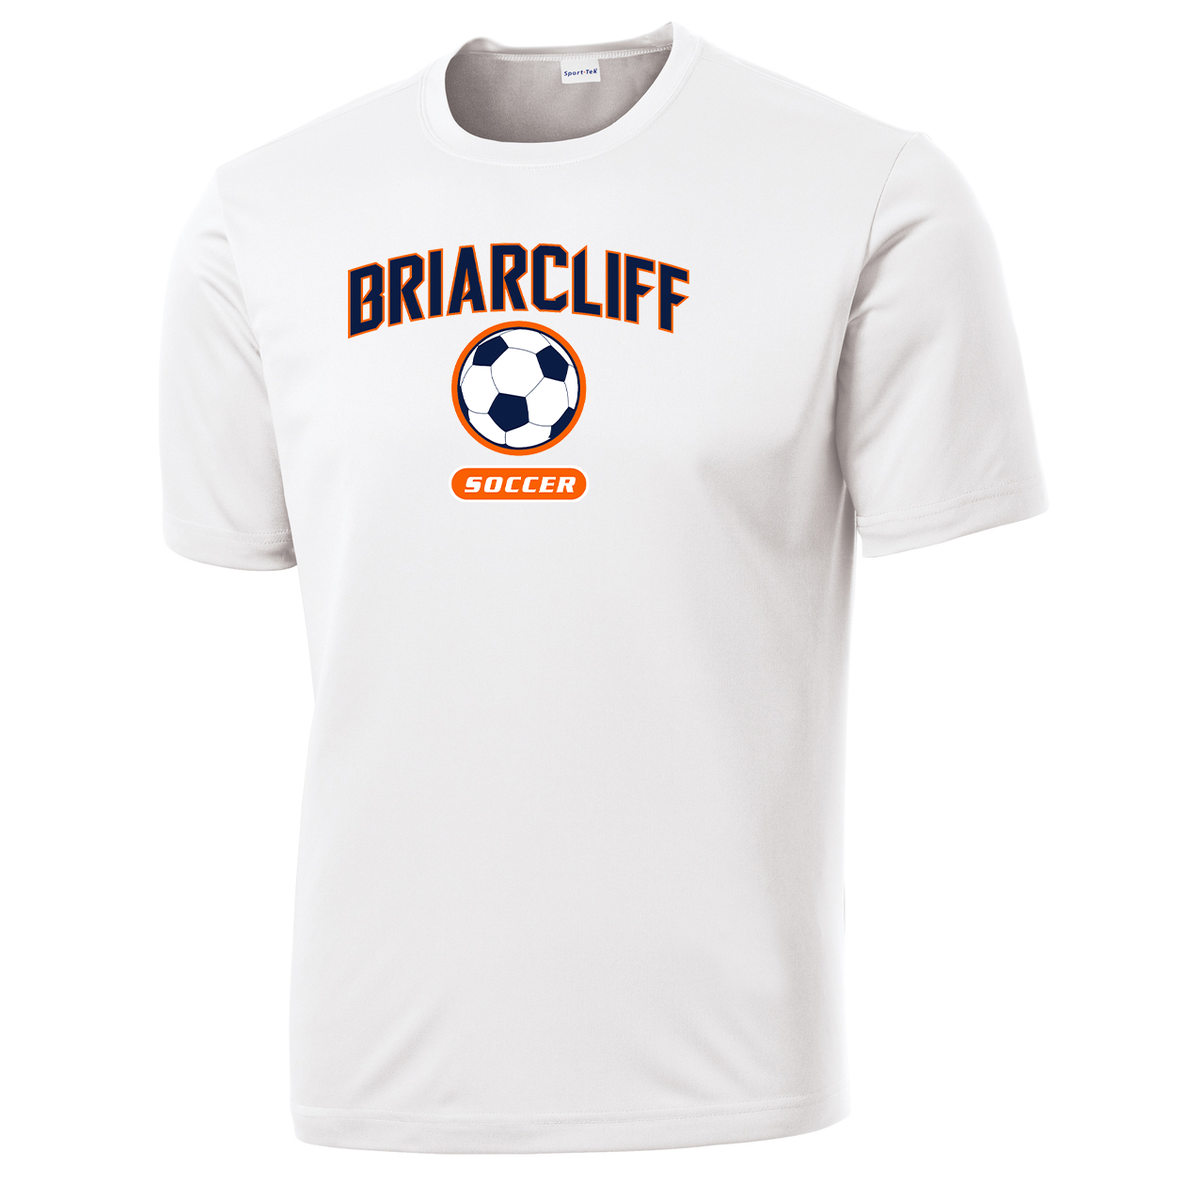 Briarcliff Soccer Performance T-Shirt